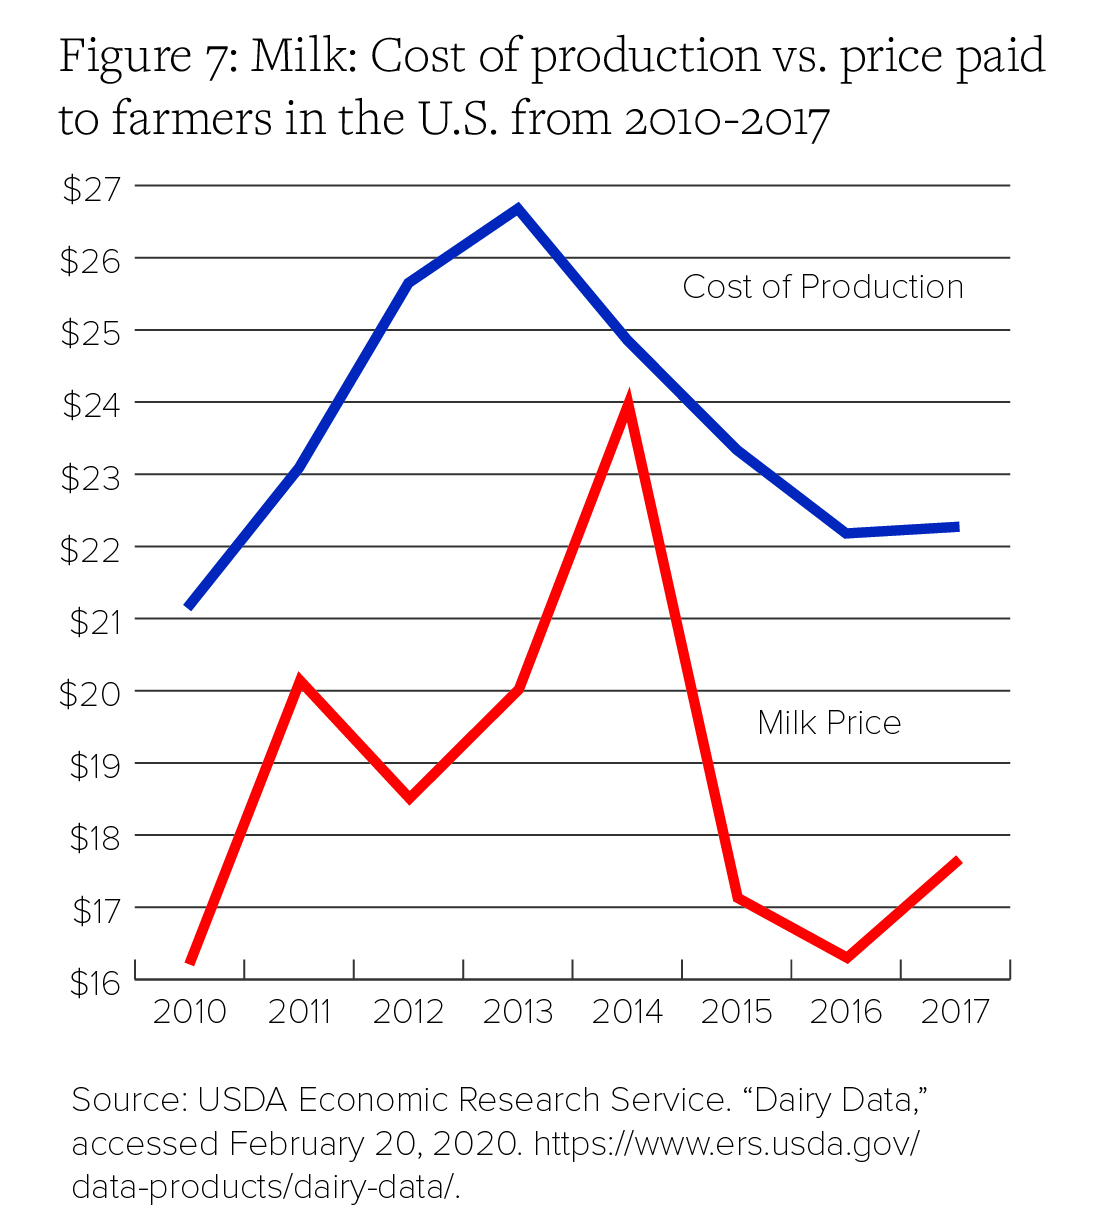 Figure 7: Milk: Cost of production vs. price paid to farmers in the U.S. from 2010-2017